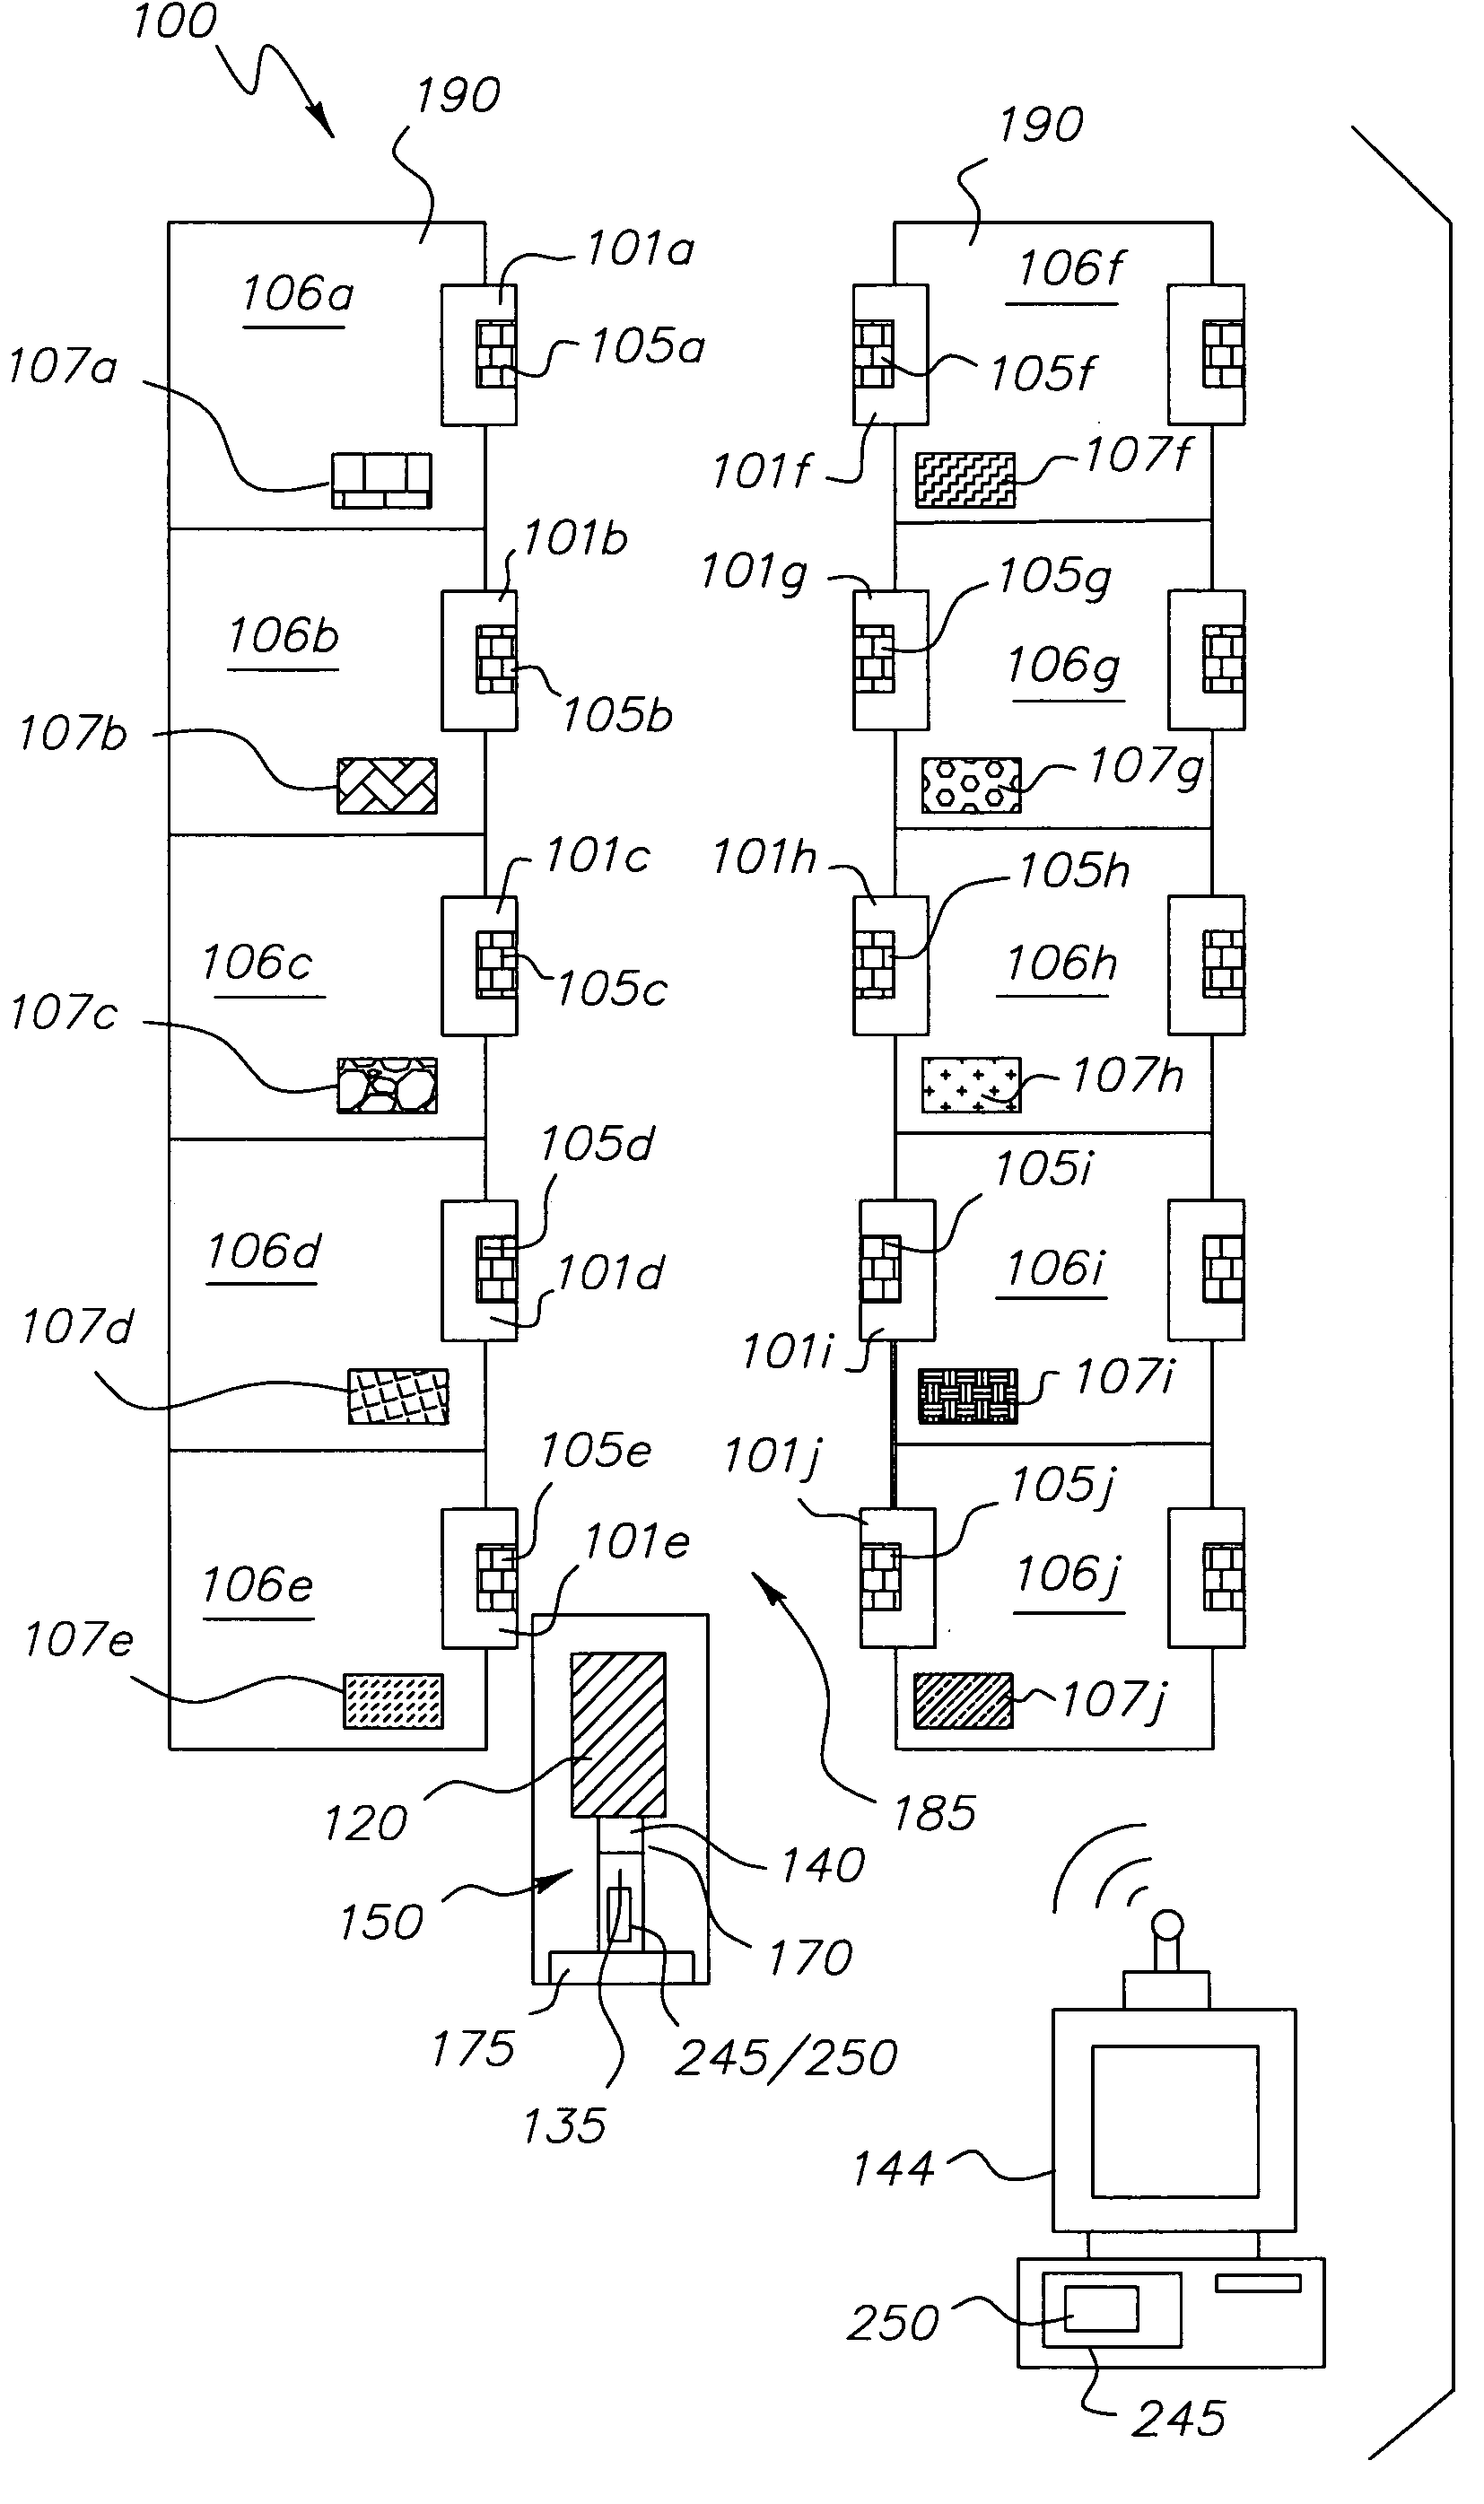 Item information system and method